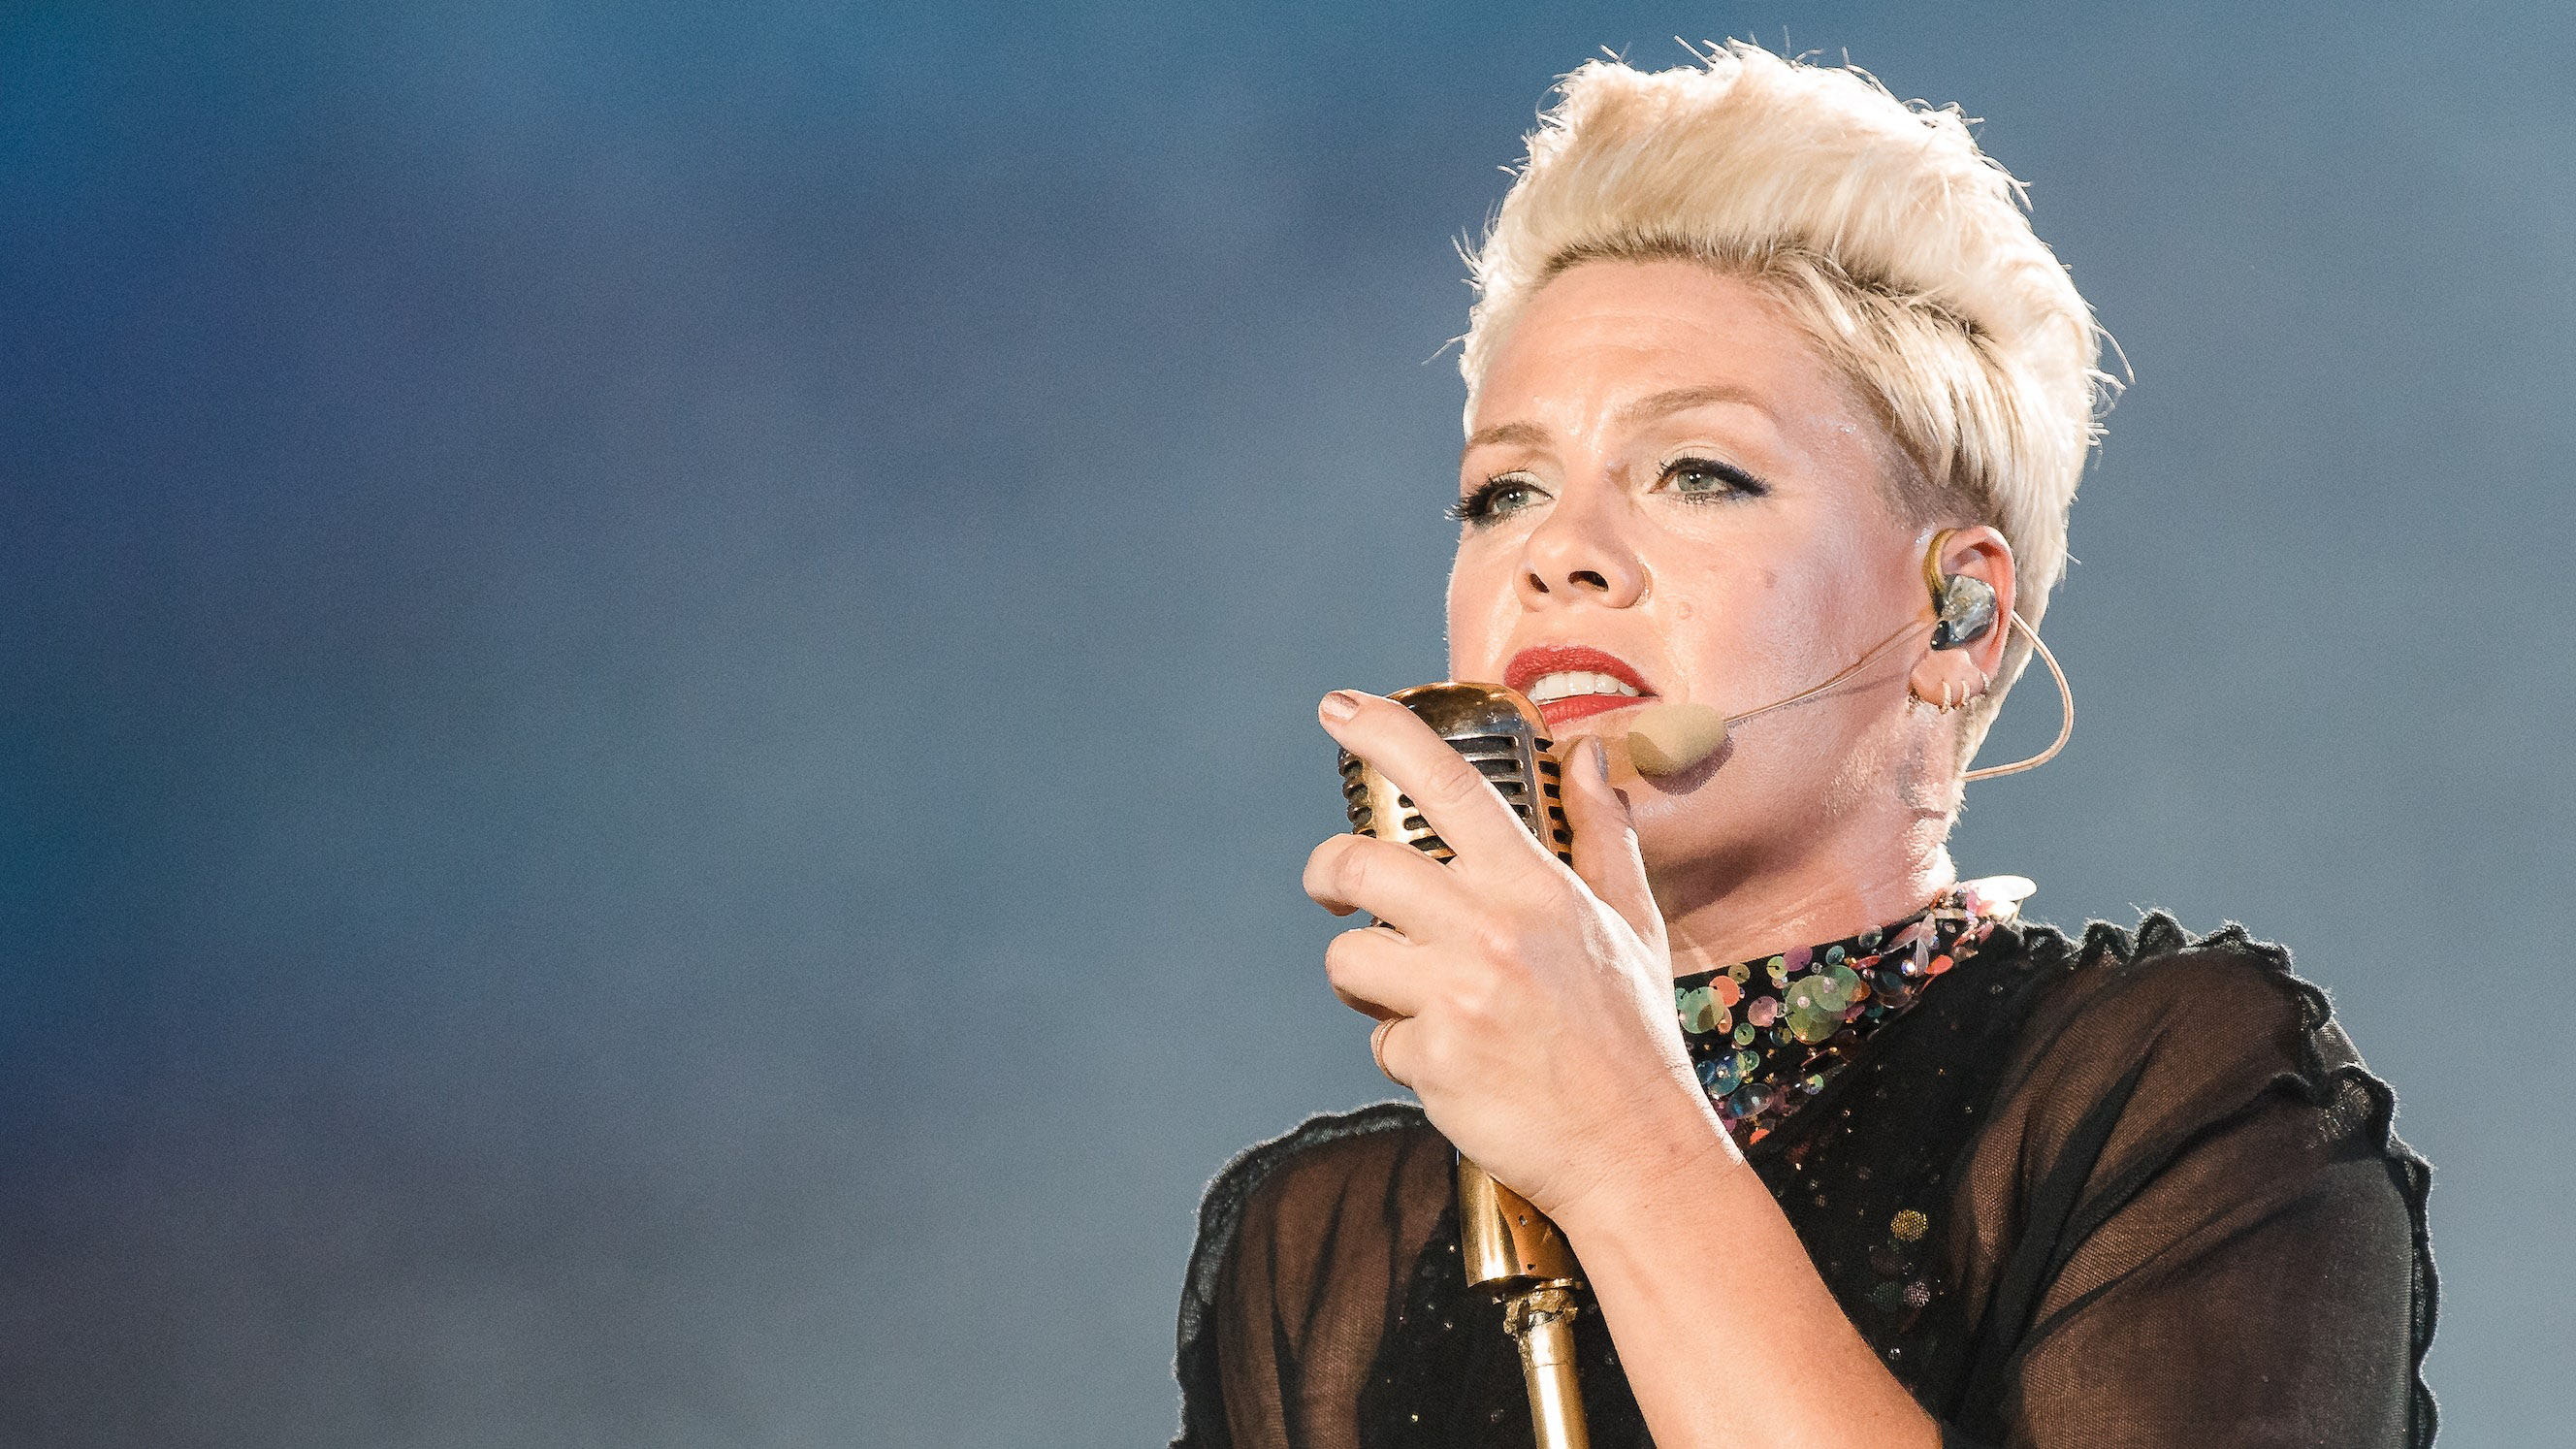 Alecia Beth Moore (born September 8, 1979), known professionally as Pink (stylized as P!nk), is an American singer and songwriter. She was originally ...